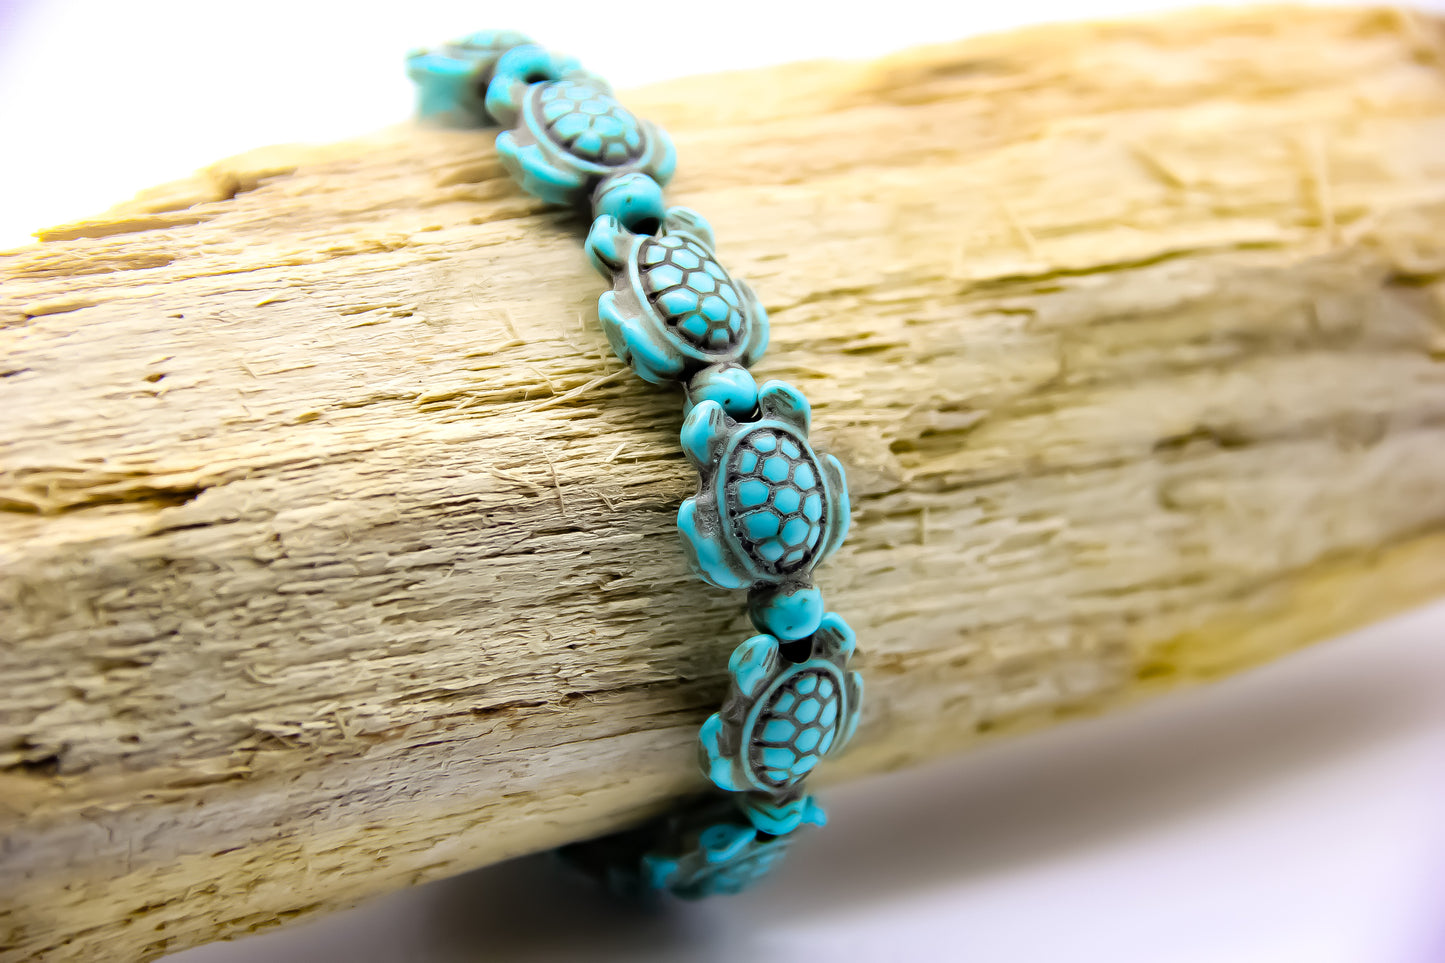 Bracelet of turquoise stone sea turtles displayed on a piece of driftwood